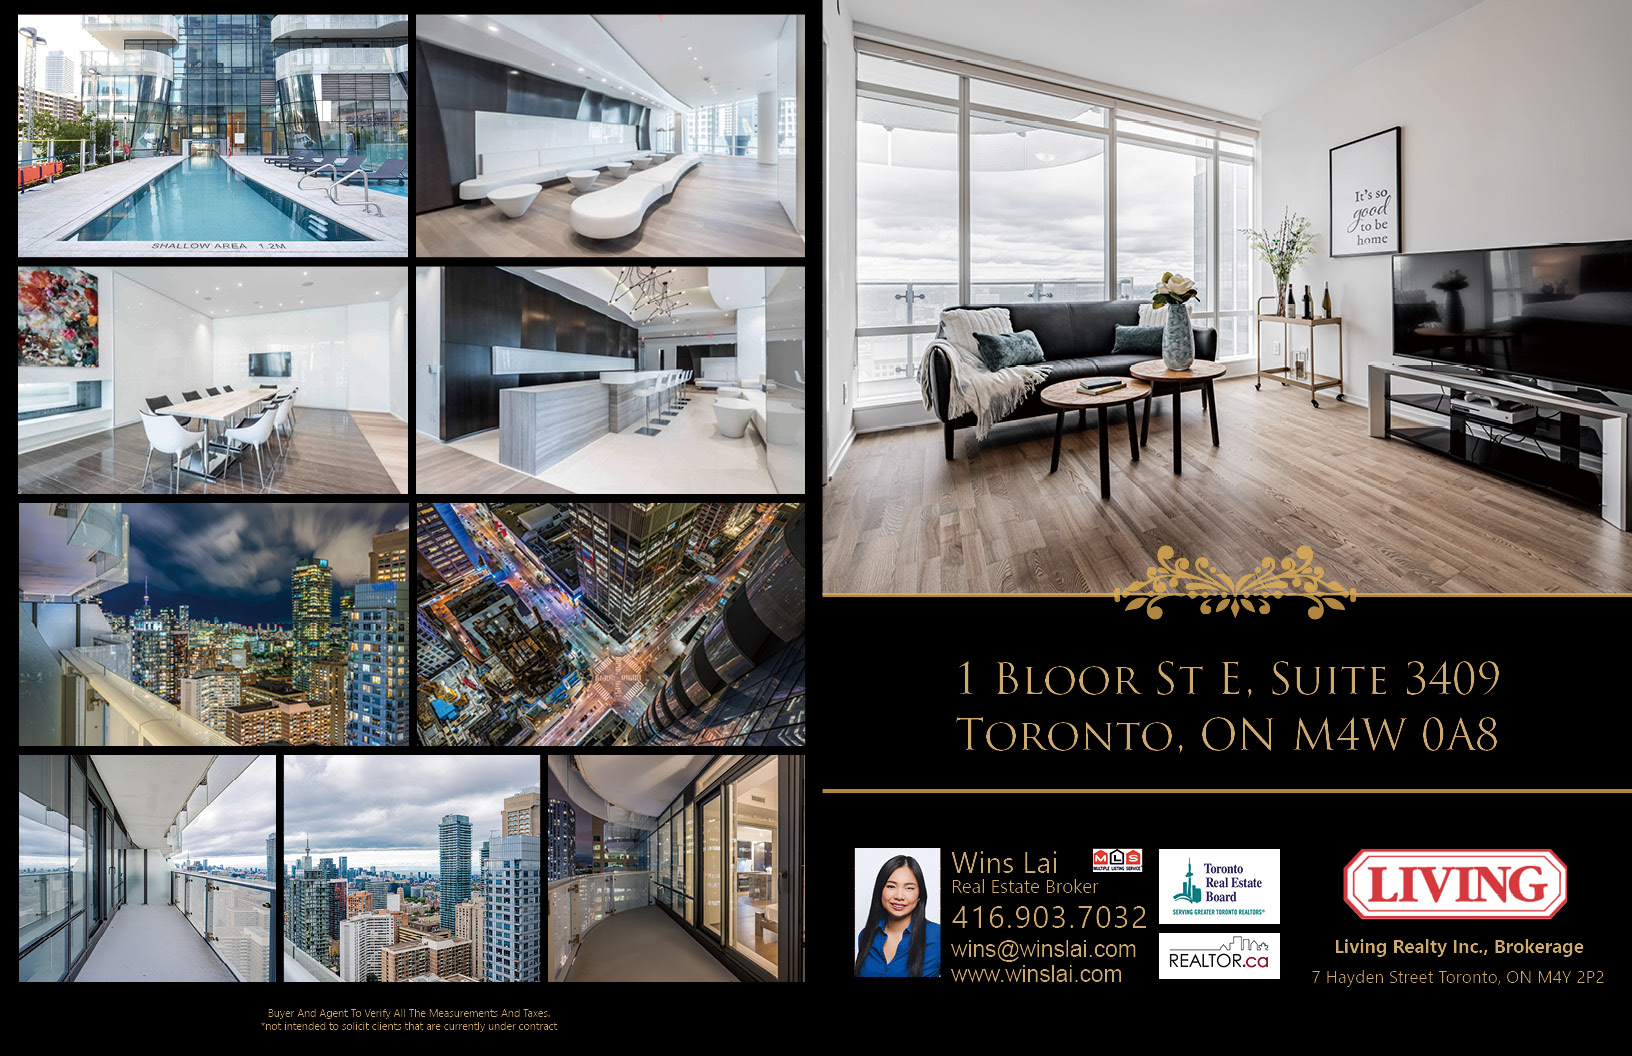 1 Bloor St E Unit 3409 brochure showing swimming pool, party room, buildings and more.